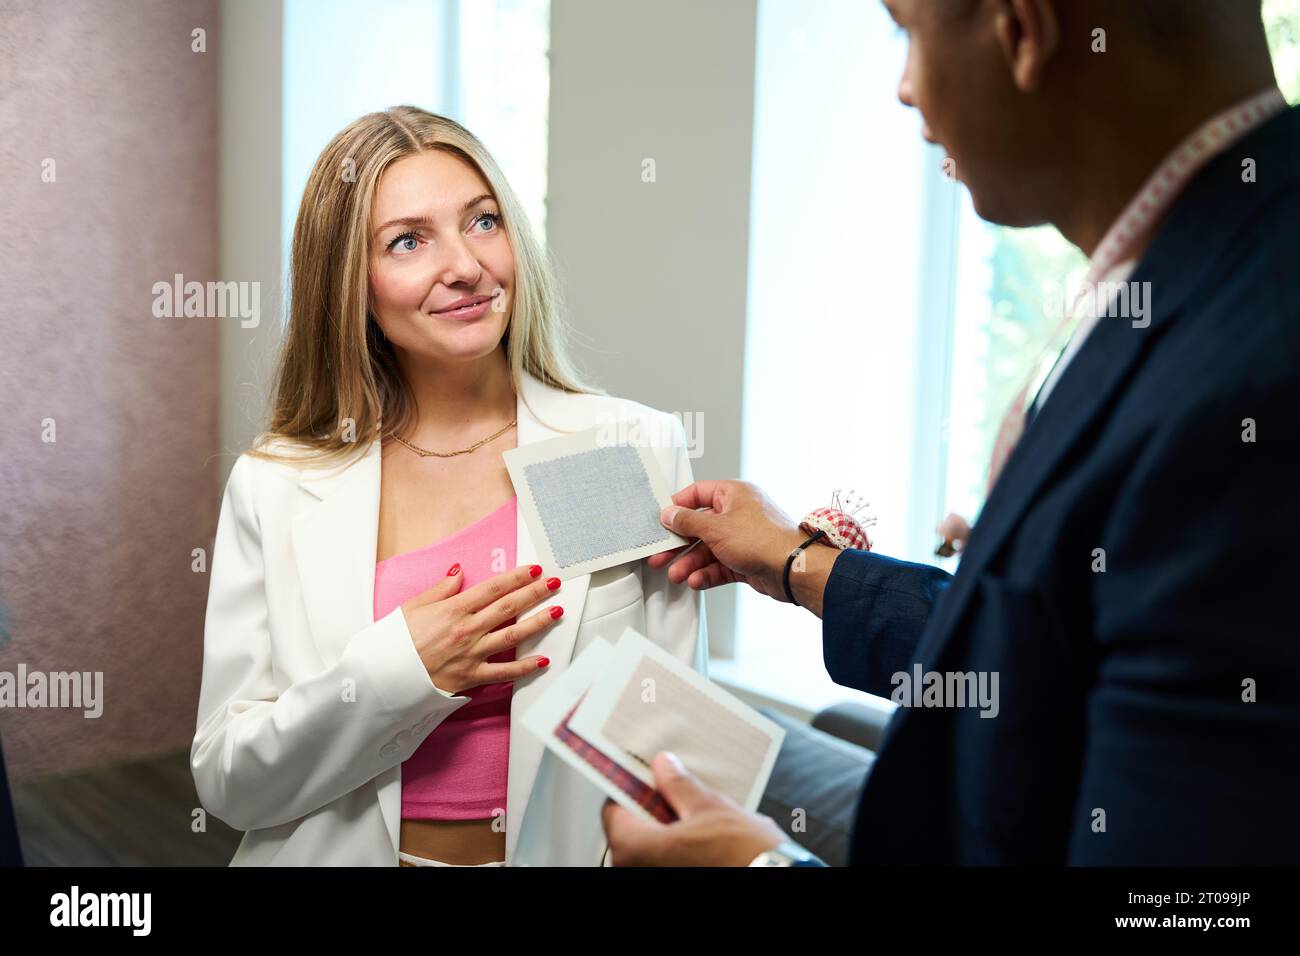 Fashion designer choosing appropriate sewing fabric for client Stock Photo